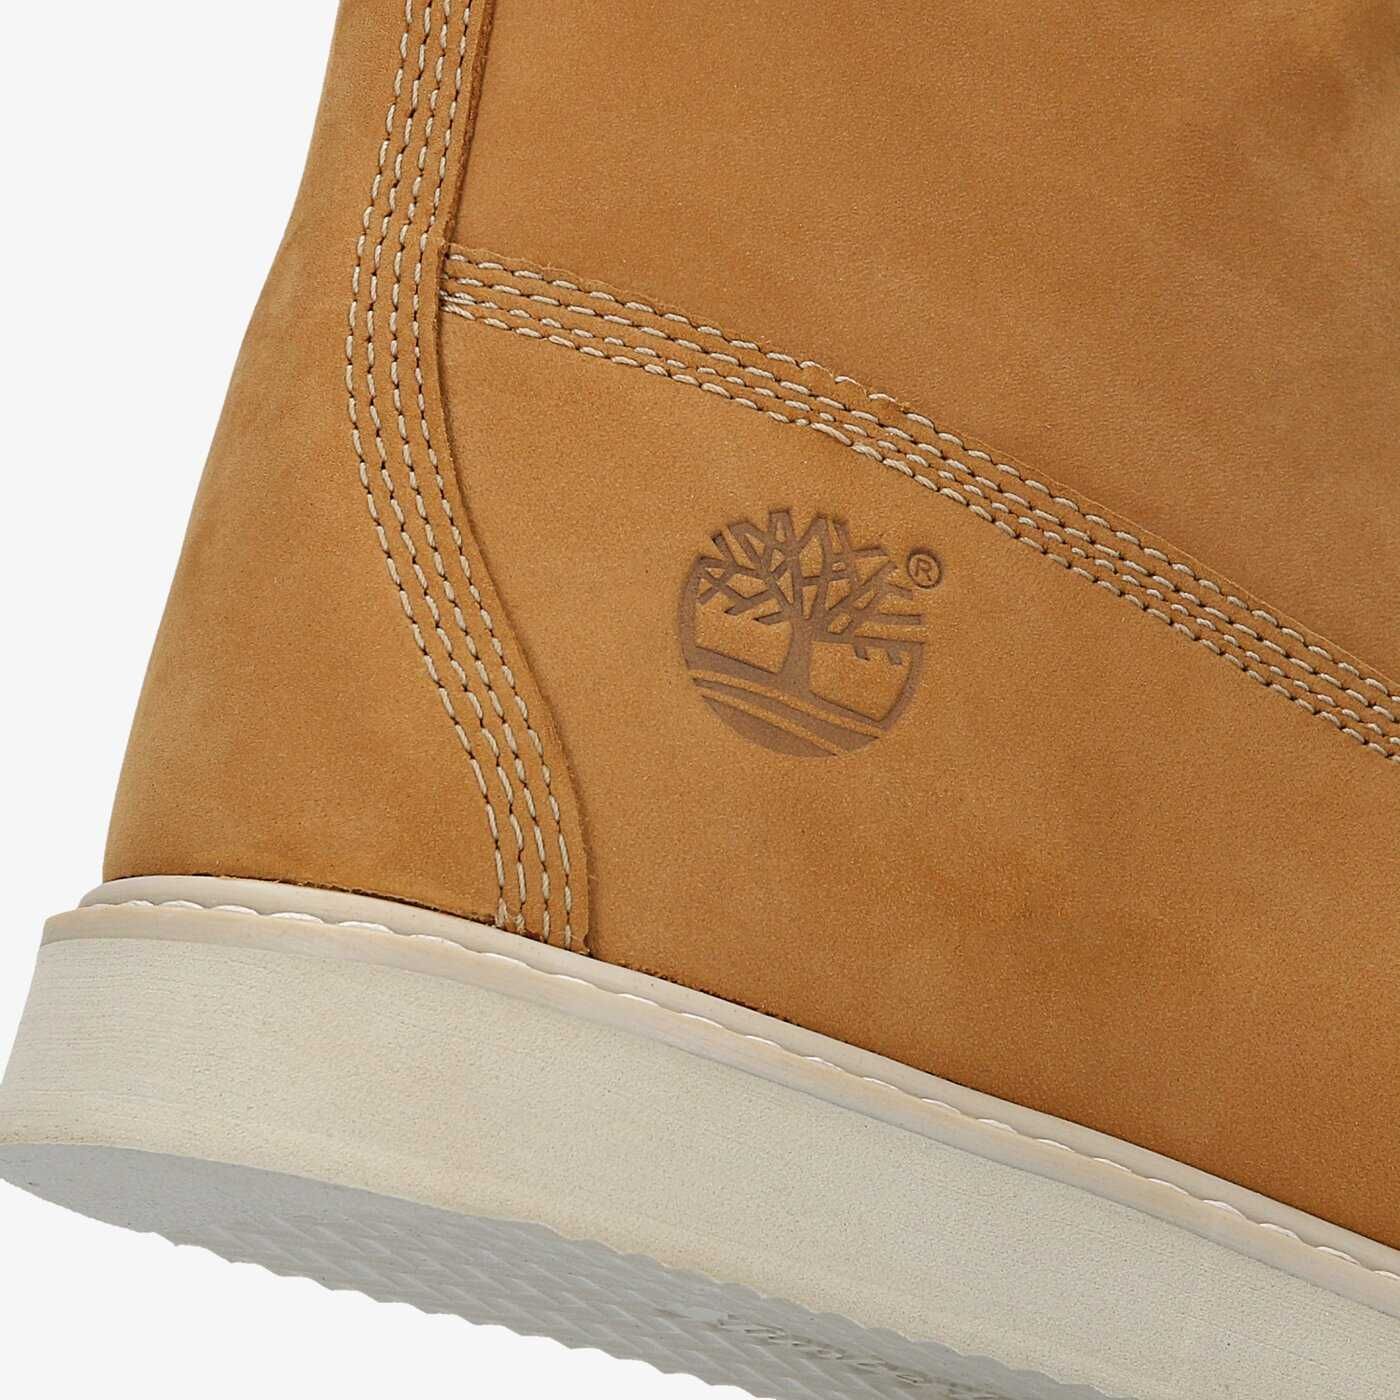 Timberland Newmarket 6IN Wedge (roz. 41,5)